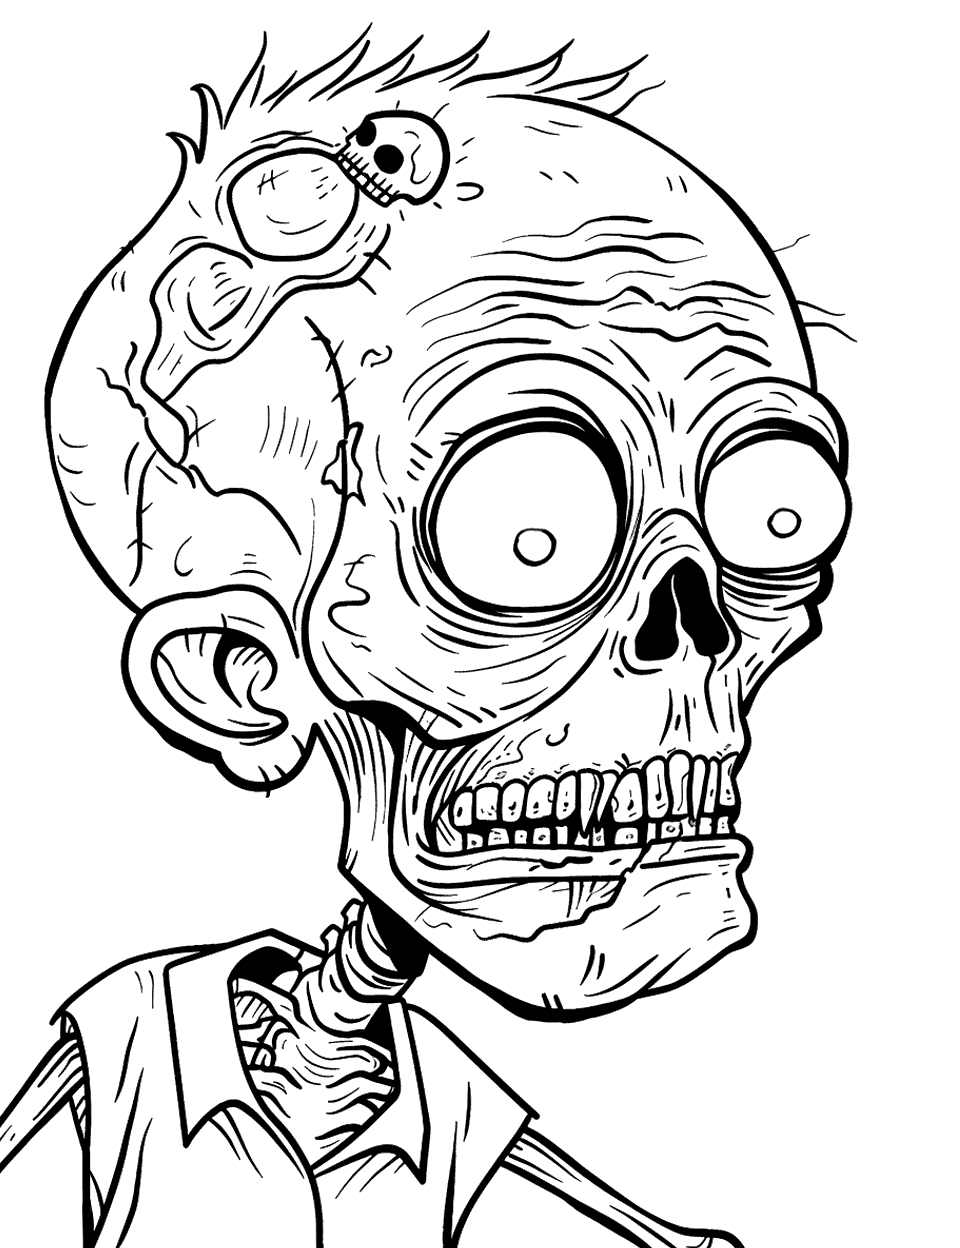 Skull Zombie Leader Coloring Page - A zombie with a prominent skull face, the leader of the zombie horde.